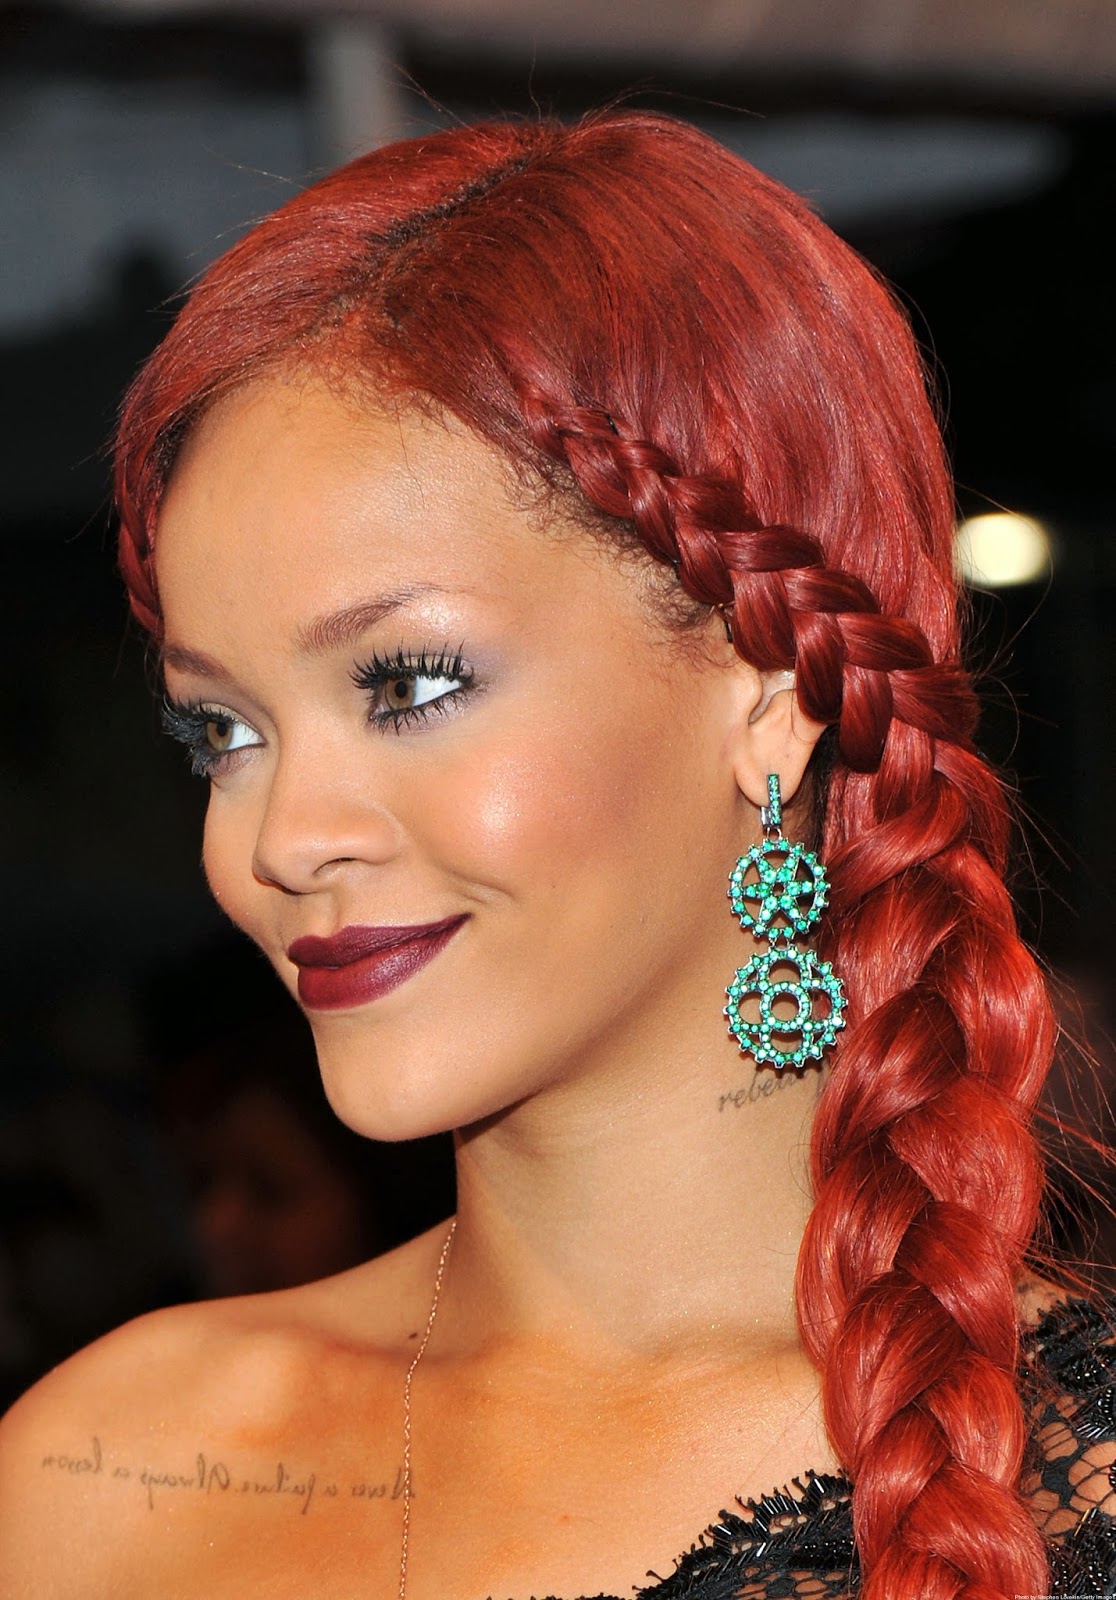 hairs style : Braided Hairstyles